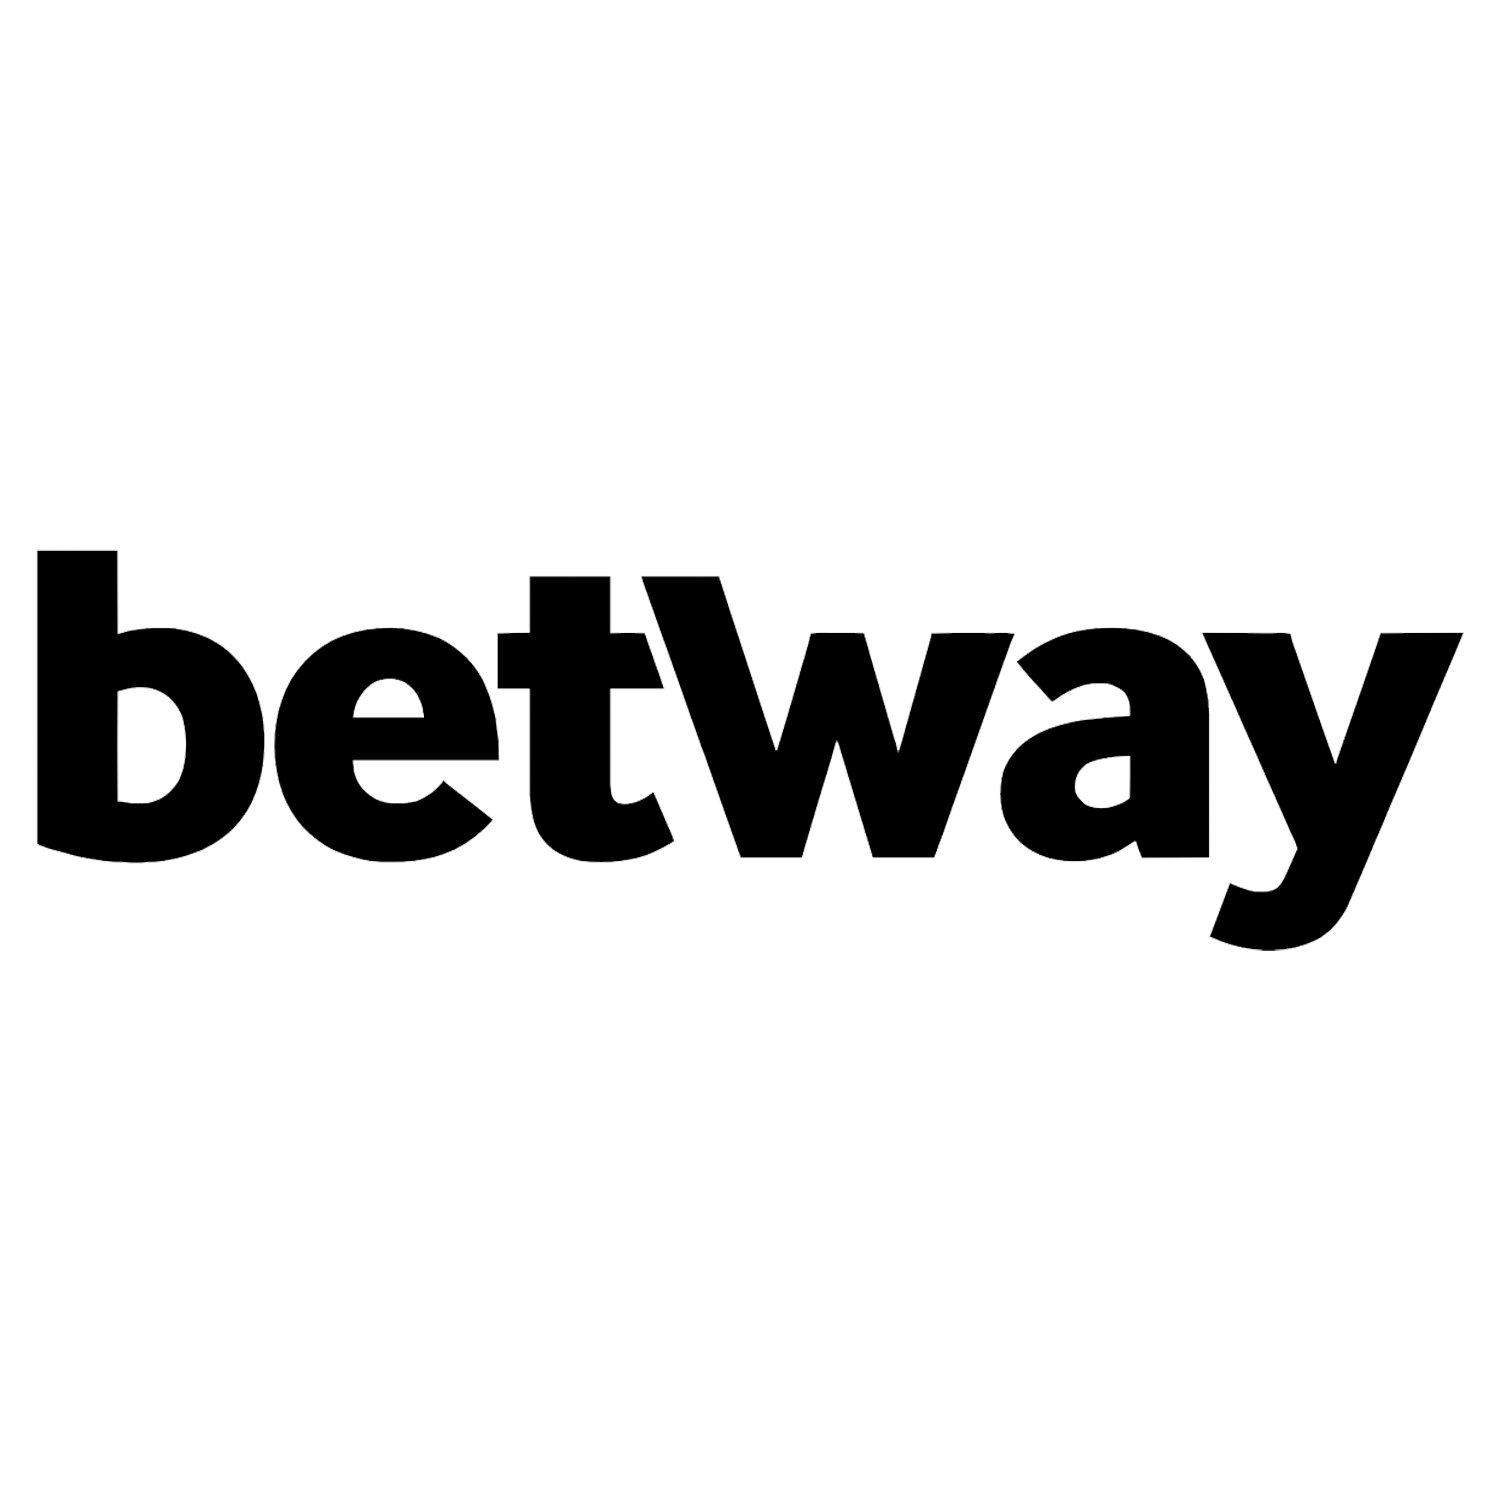 Betway - top 3 sportbook for online betting in Bangladesh according to Bettingonlinebd..